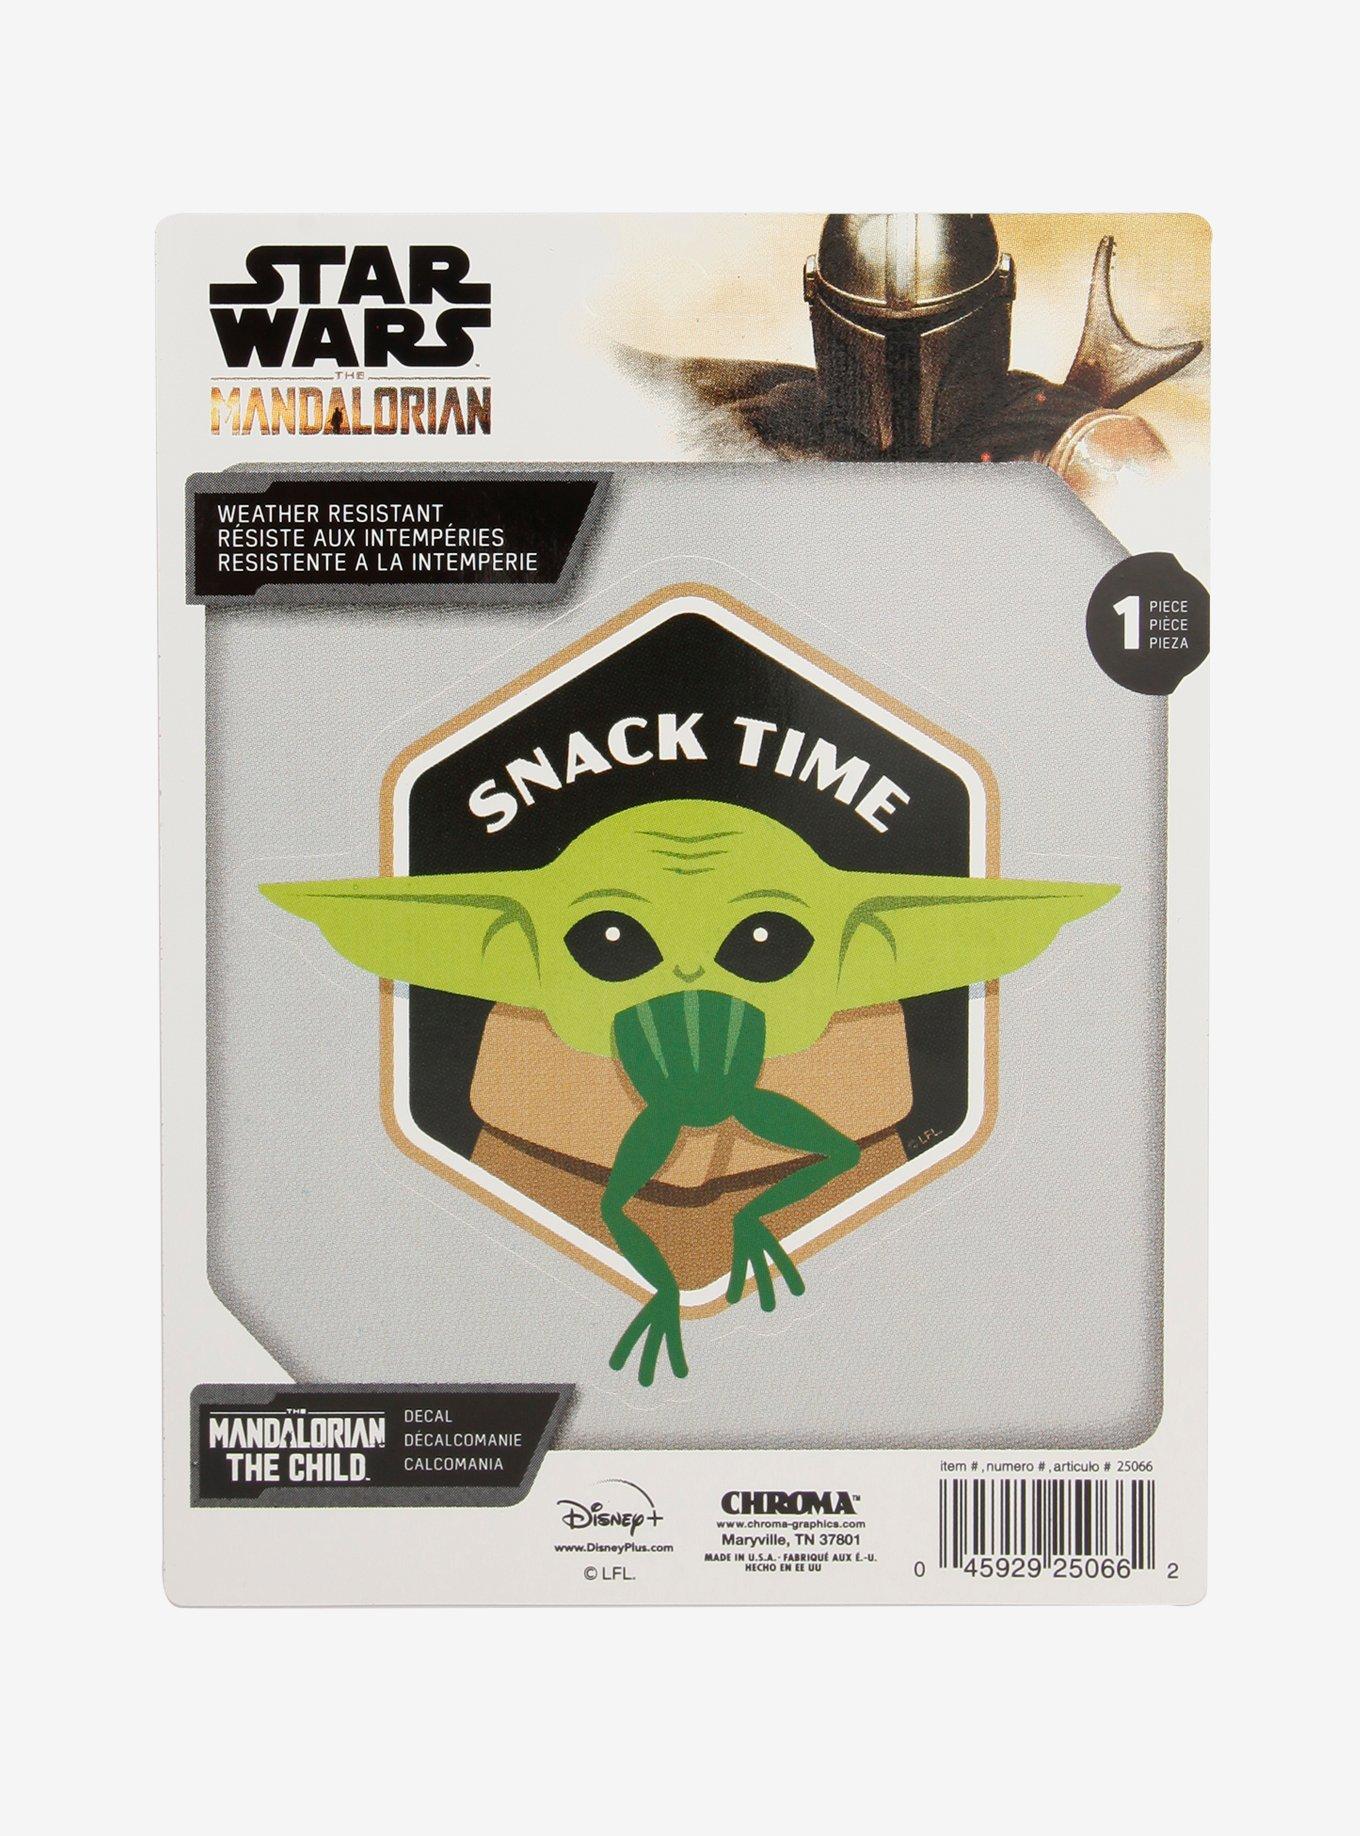 Star Wars The Mandalorian The Child Snack Time Decal, , hi-res